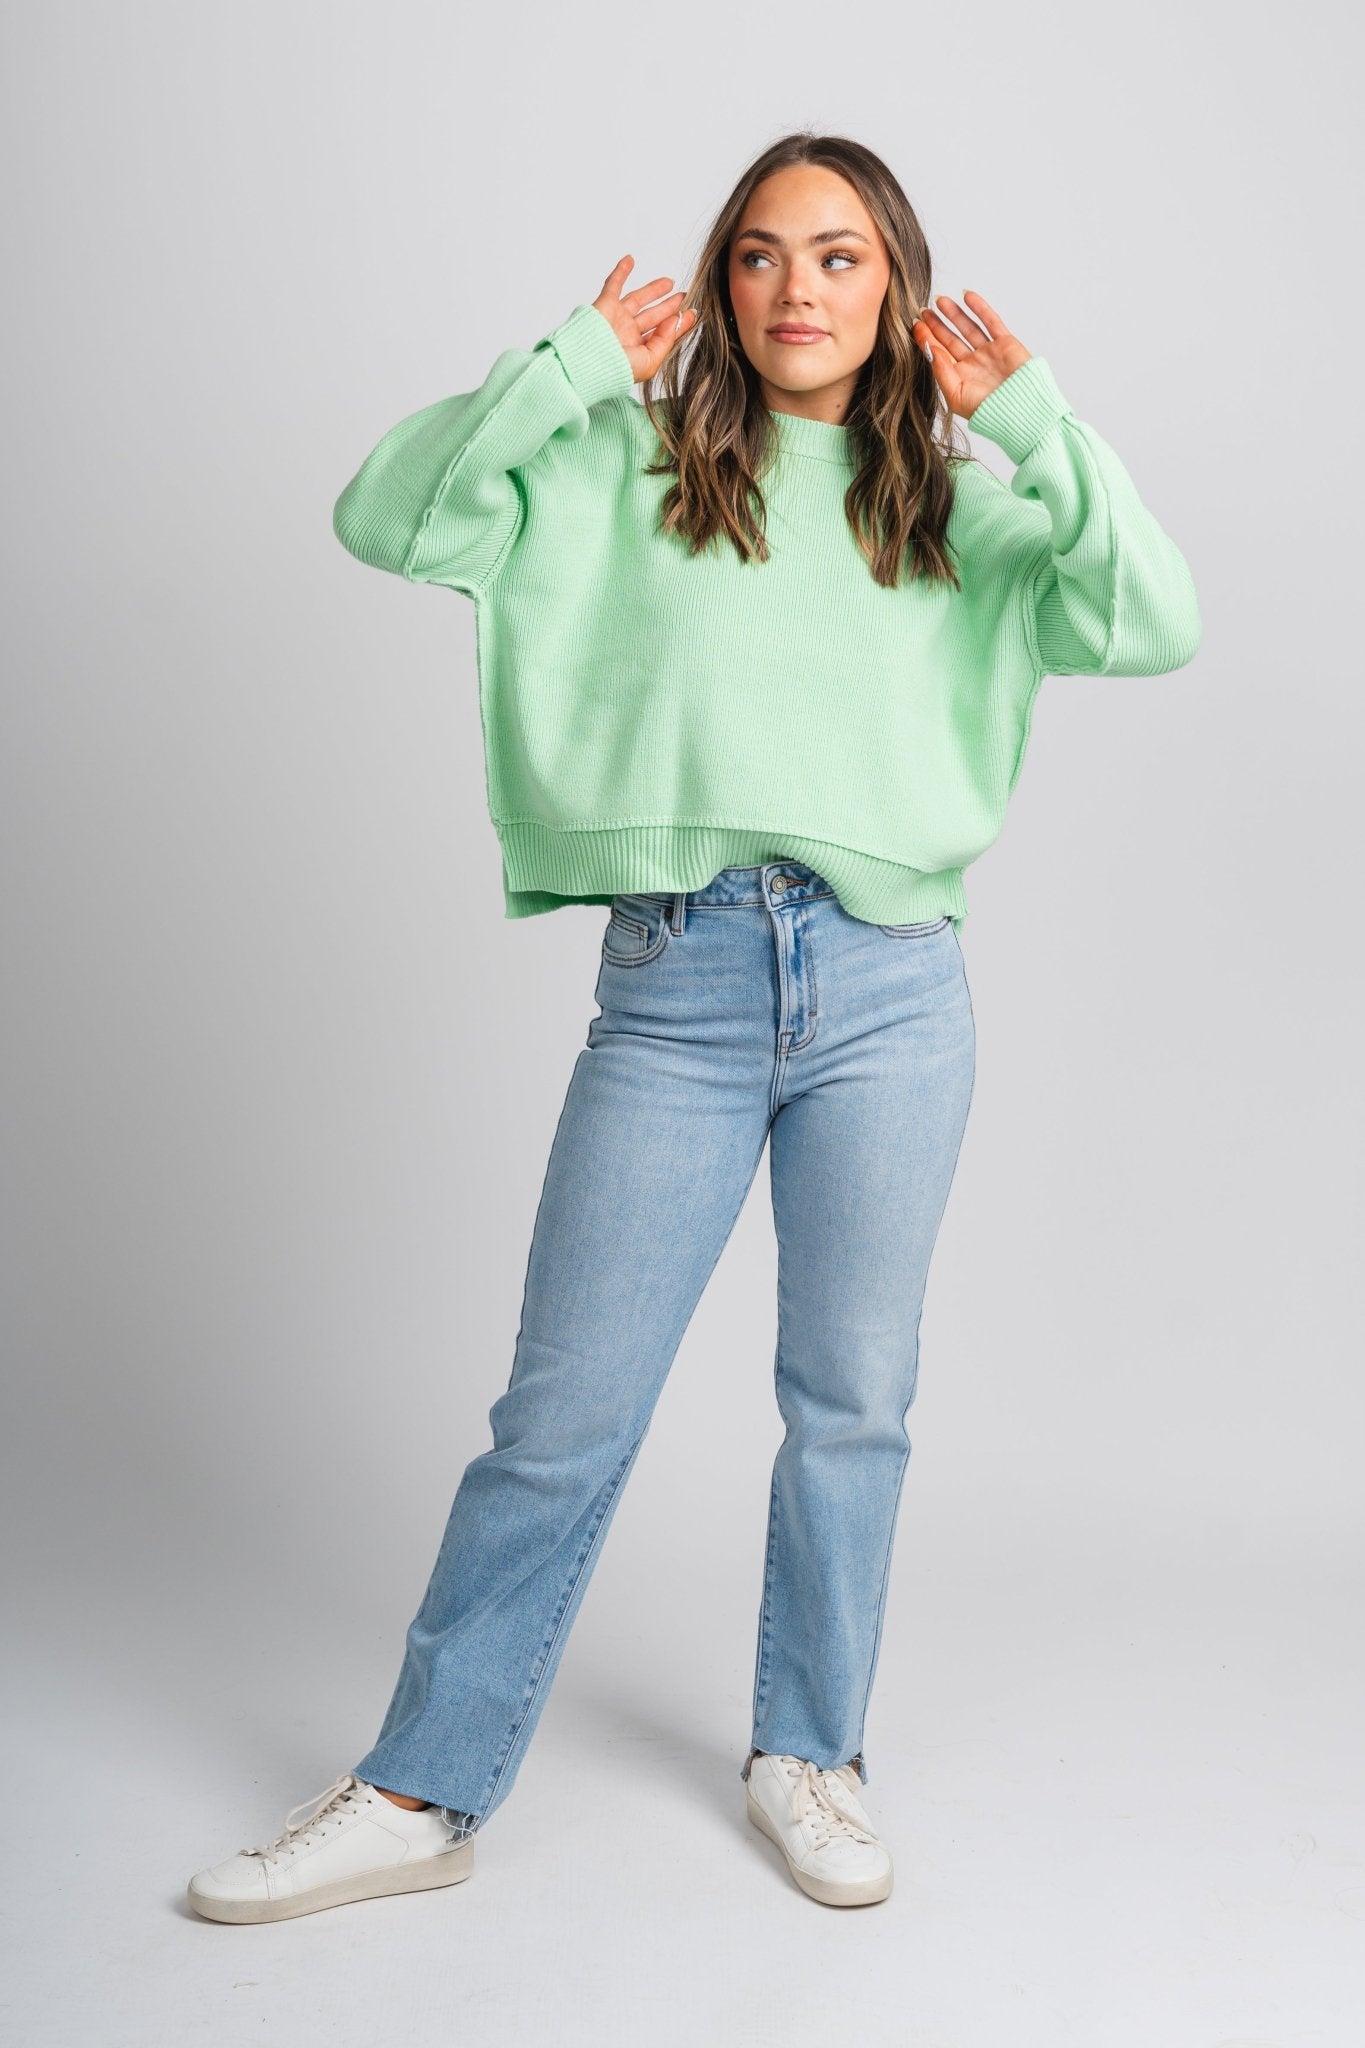 Leda chunky sweater mint - Cute Sweaters - Trendy Easter Clothing Line at Lush Fashion Lounge Boutique in Oklahoma